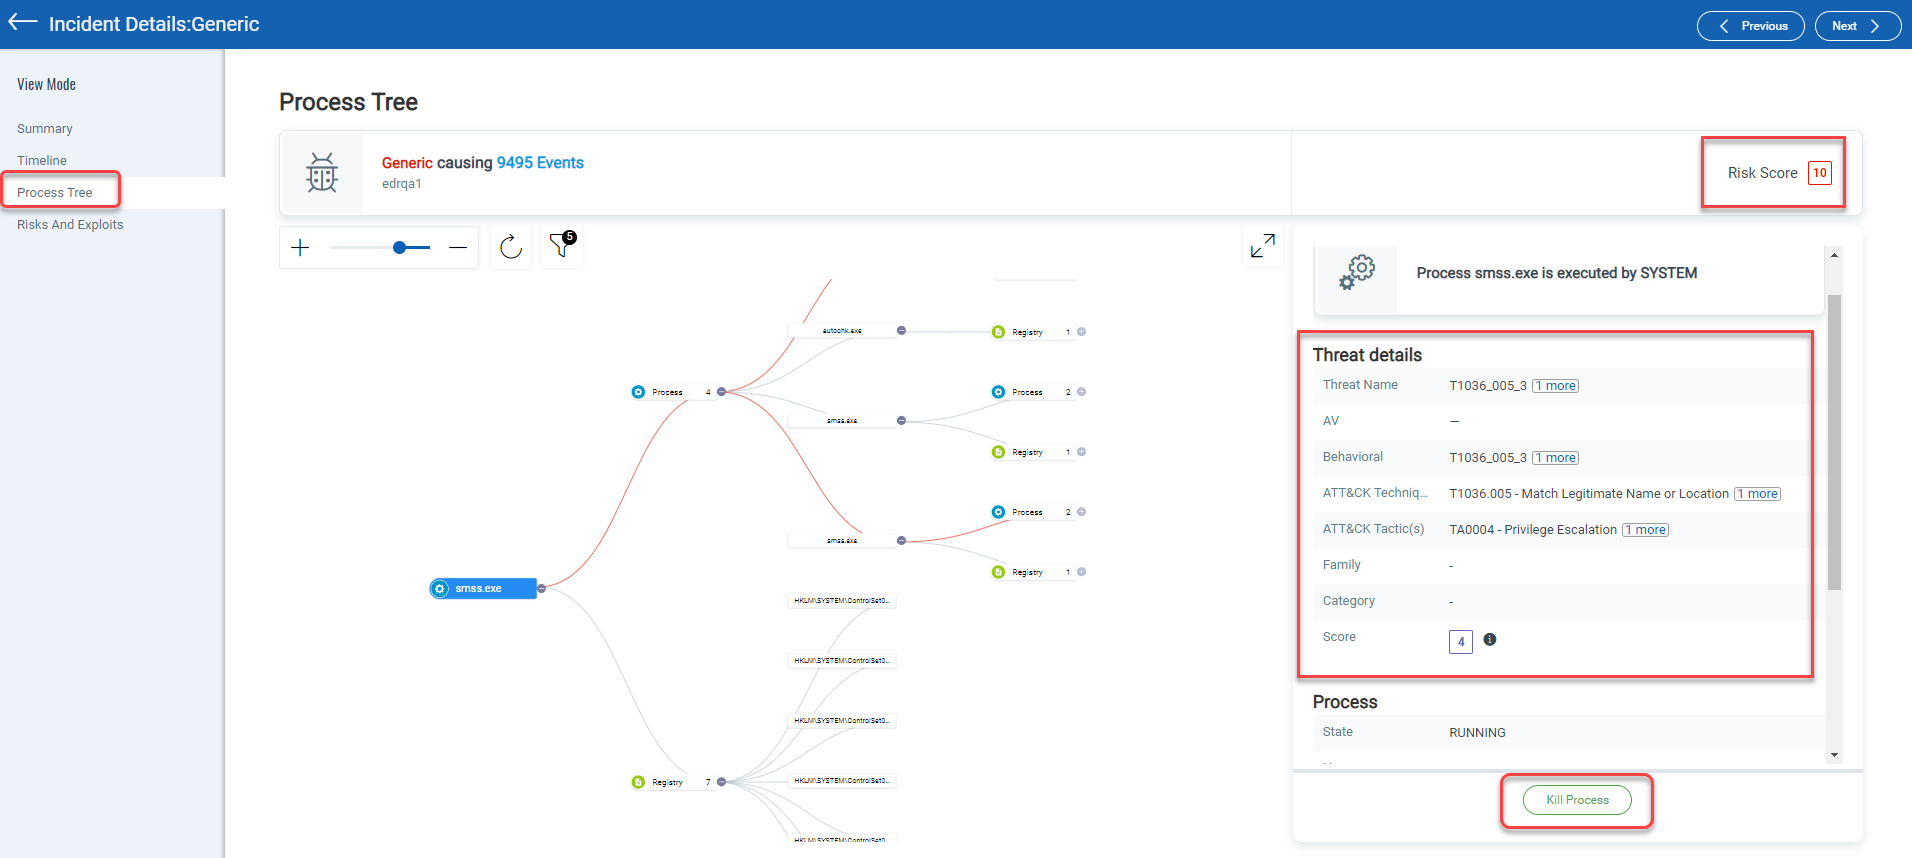 Process Tree view in Incident Details